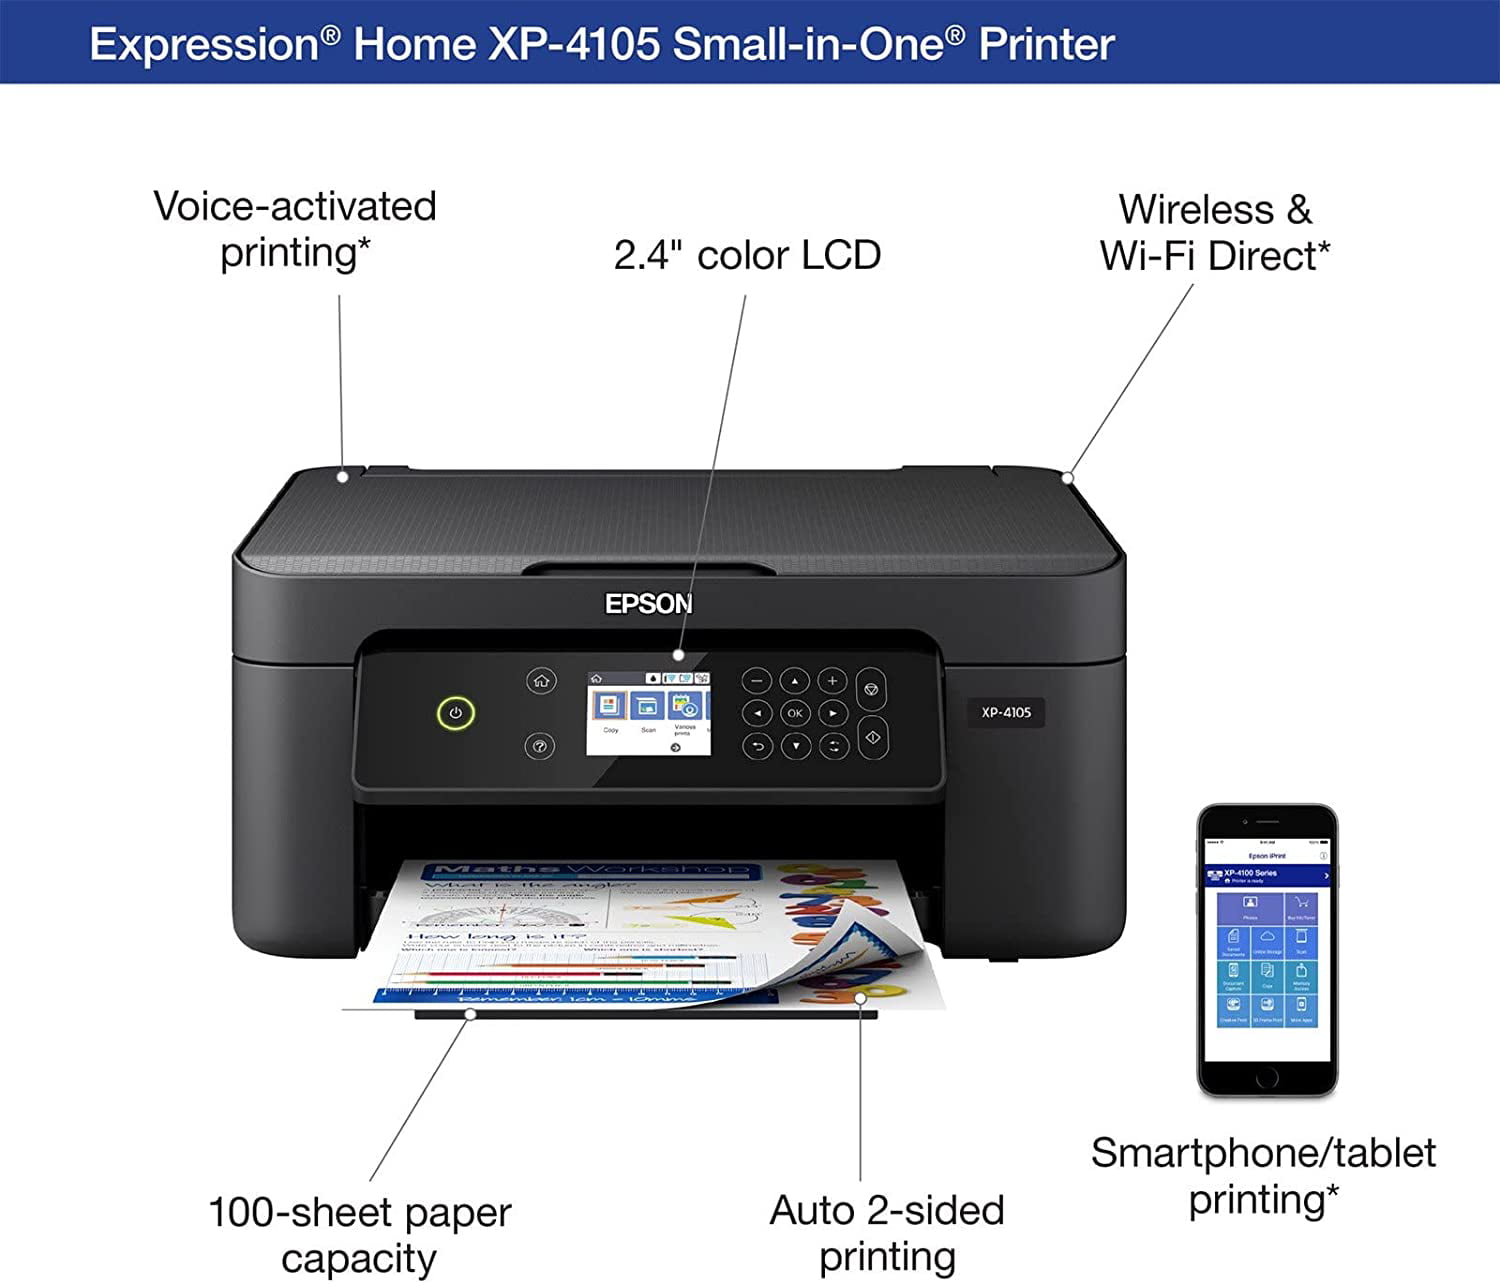 Epson 41 series Printer, All-in-One Color Inkjet Printer, Black, Scan, 2.4" LCD, Wireless, Hi-Speed USB, Auto 2-Sided Printing, Voice Activated, With NSSDC Printer Cable and File - Walmart.com